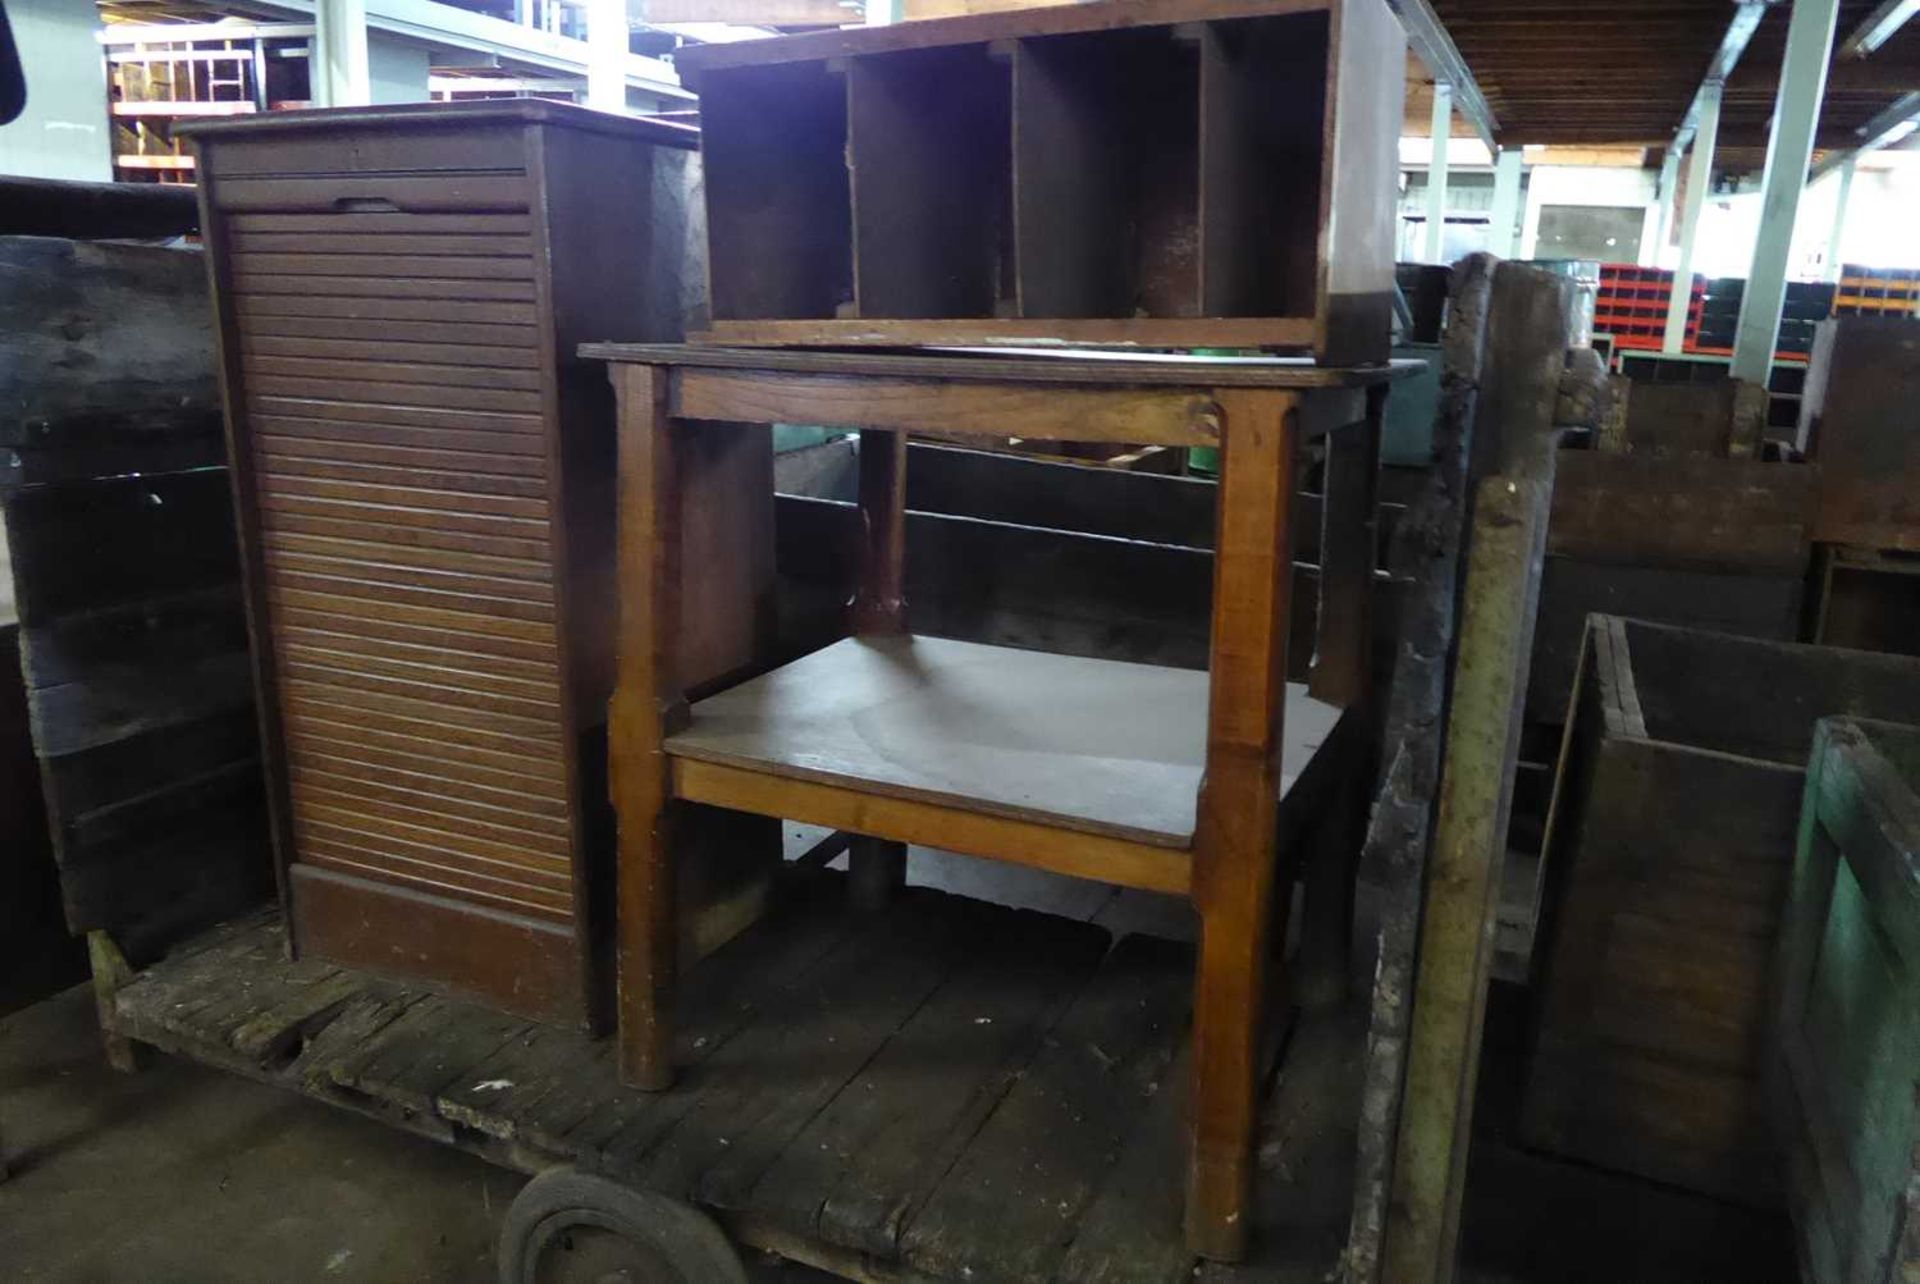 +VAT Early 20th Century barrow plus tambour fronted oak cabinet, table and small bookshelf